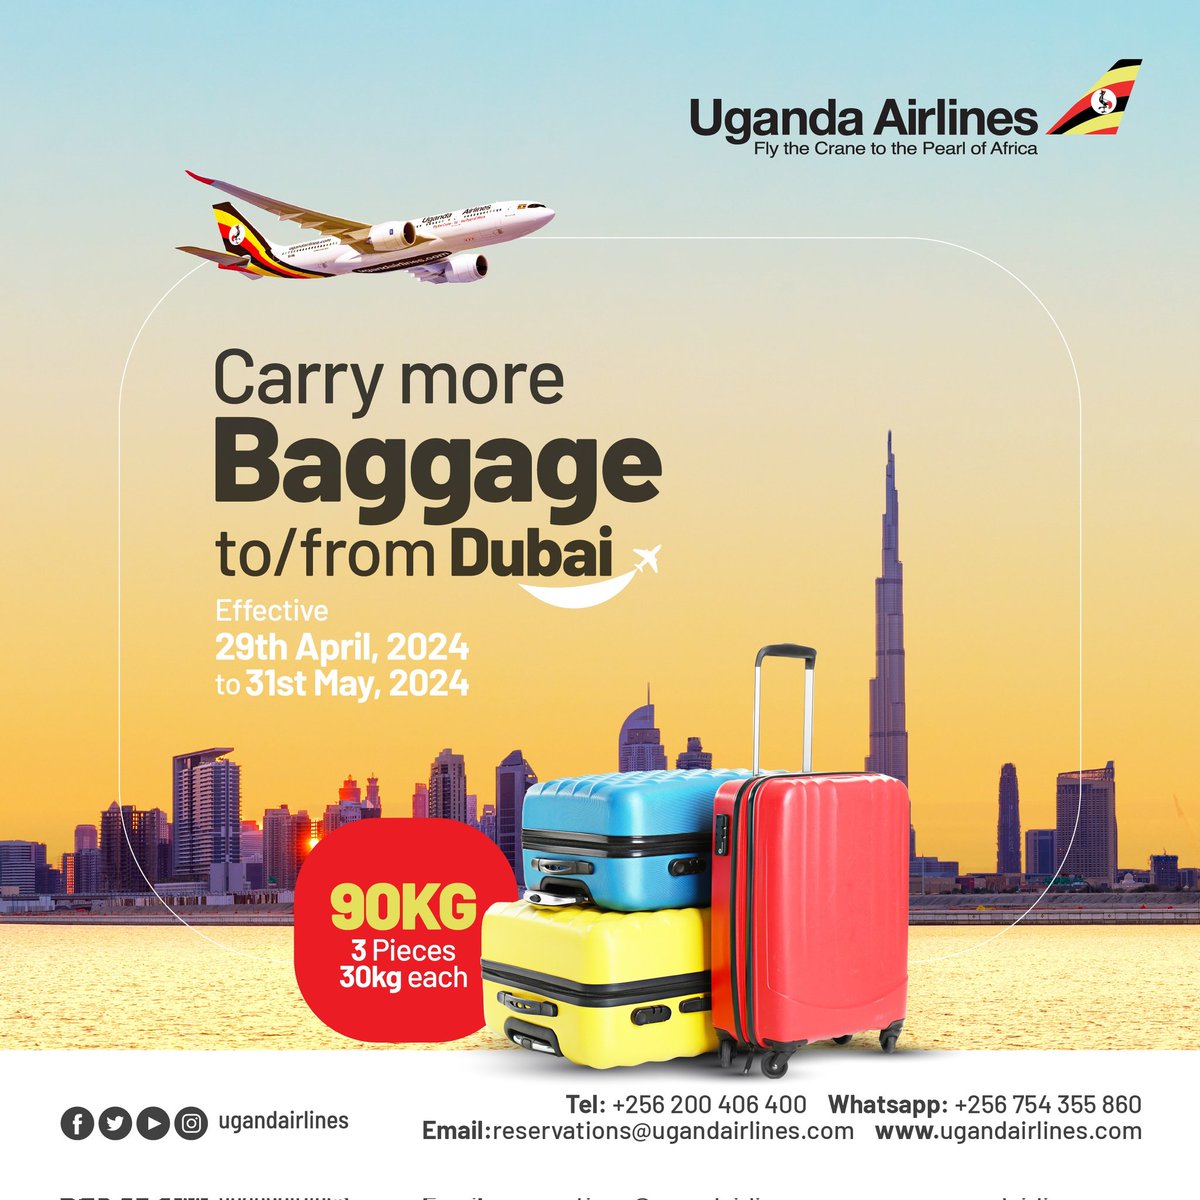 Traveling to #Dubai just got better!  Carry more Baggage of up to 90Kgs. You can book your flight today on our mobile APP or Website: ugandairlines.com #FlyUgandaAirlines
#infrastructureUG